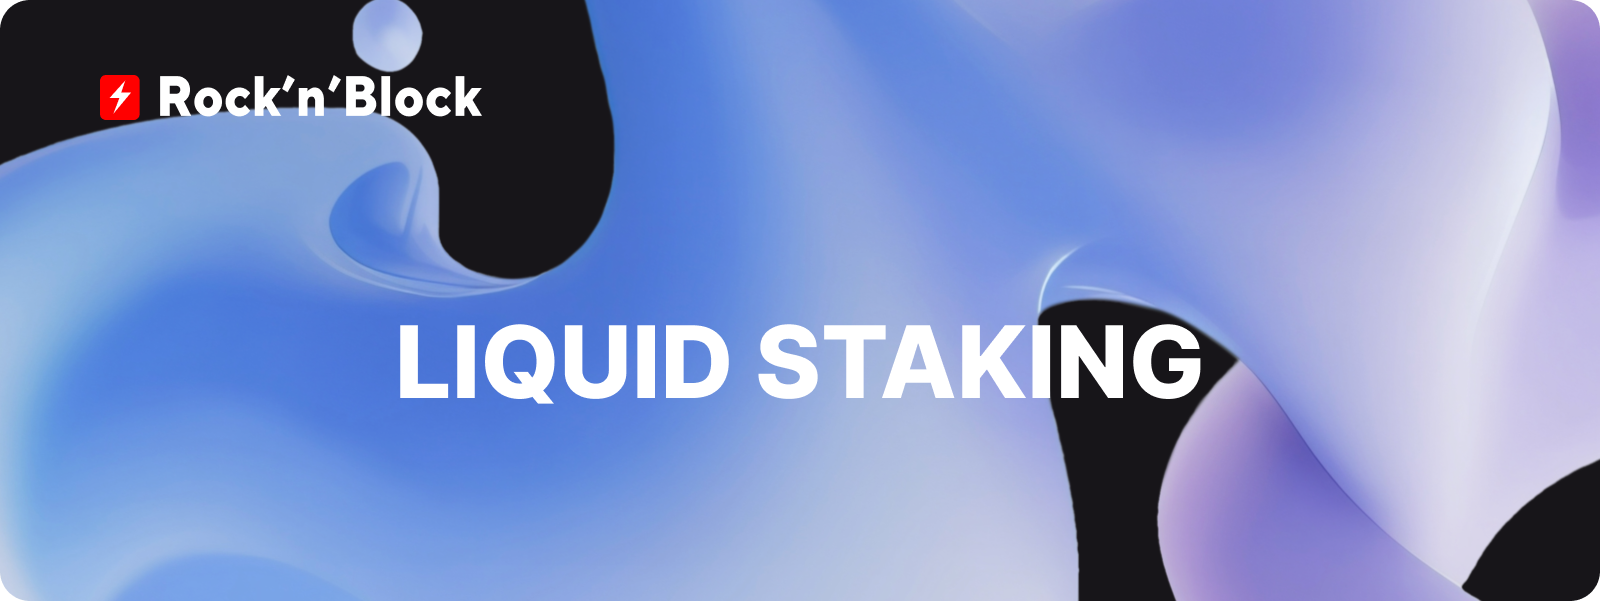 Liquid staking is a DeFi innovation that allows token holders to stake their proof-of-stake (PoS) assets while still maintaining liquidity and the ability to trade or use their assets for other purposes. It offers users a way to participate in PoS networks and generate rewards without the typical lock-up period.